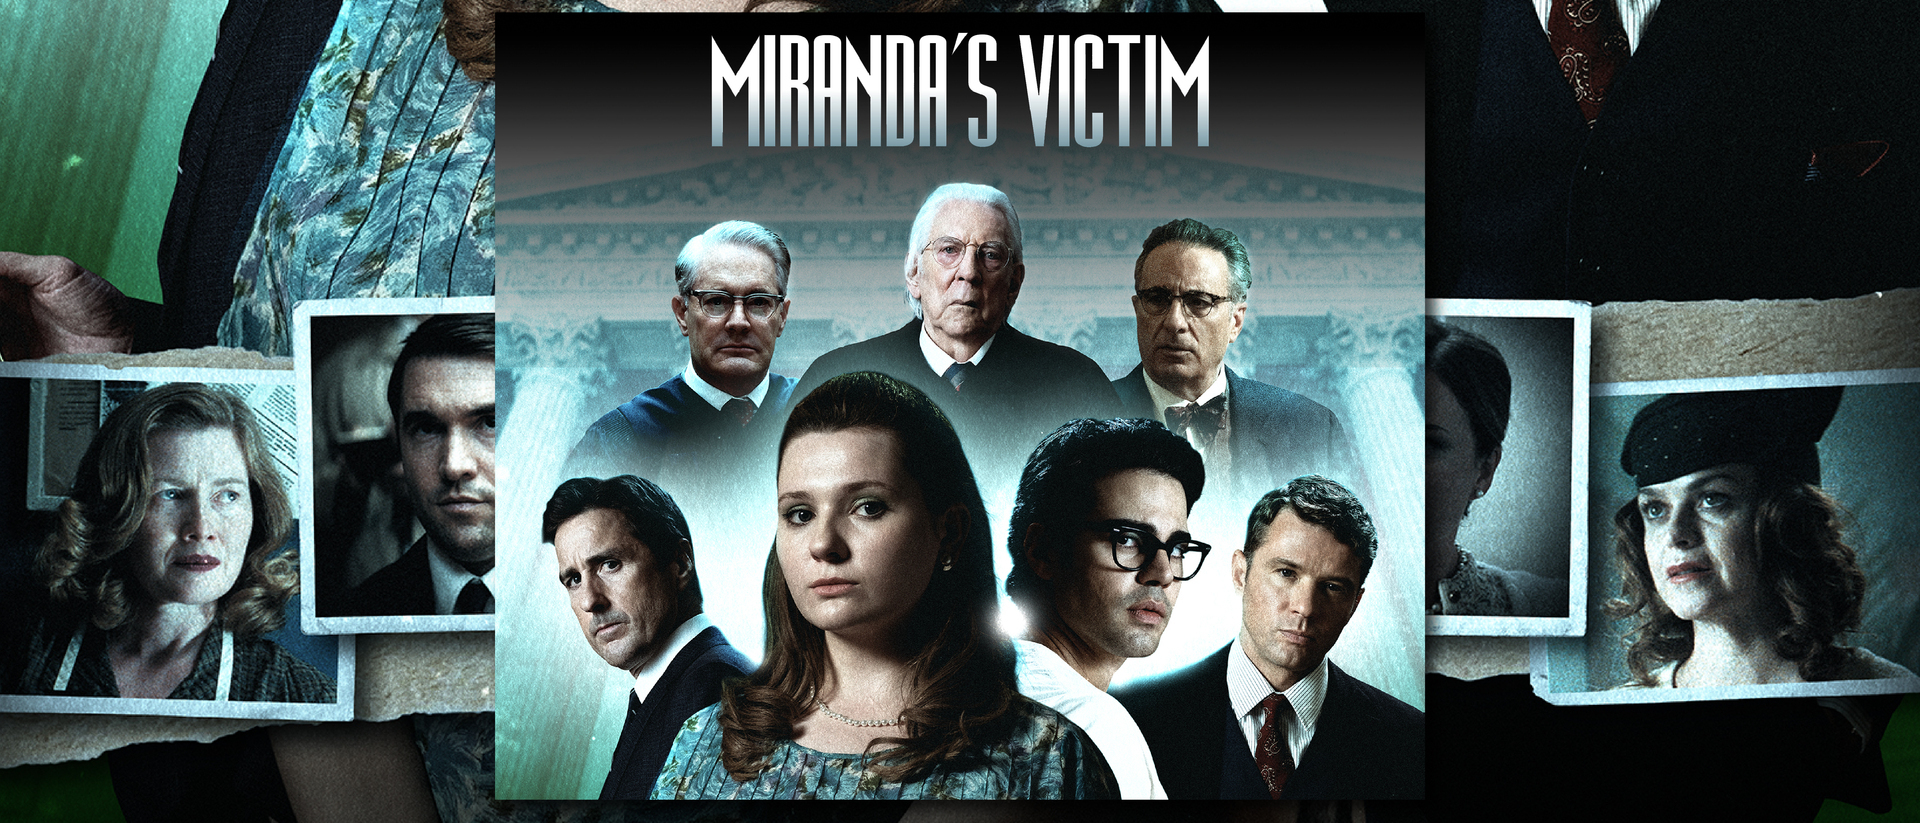 Special Advance Screening – Miranda's Victim, West Long Branch, New Jersey, United States